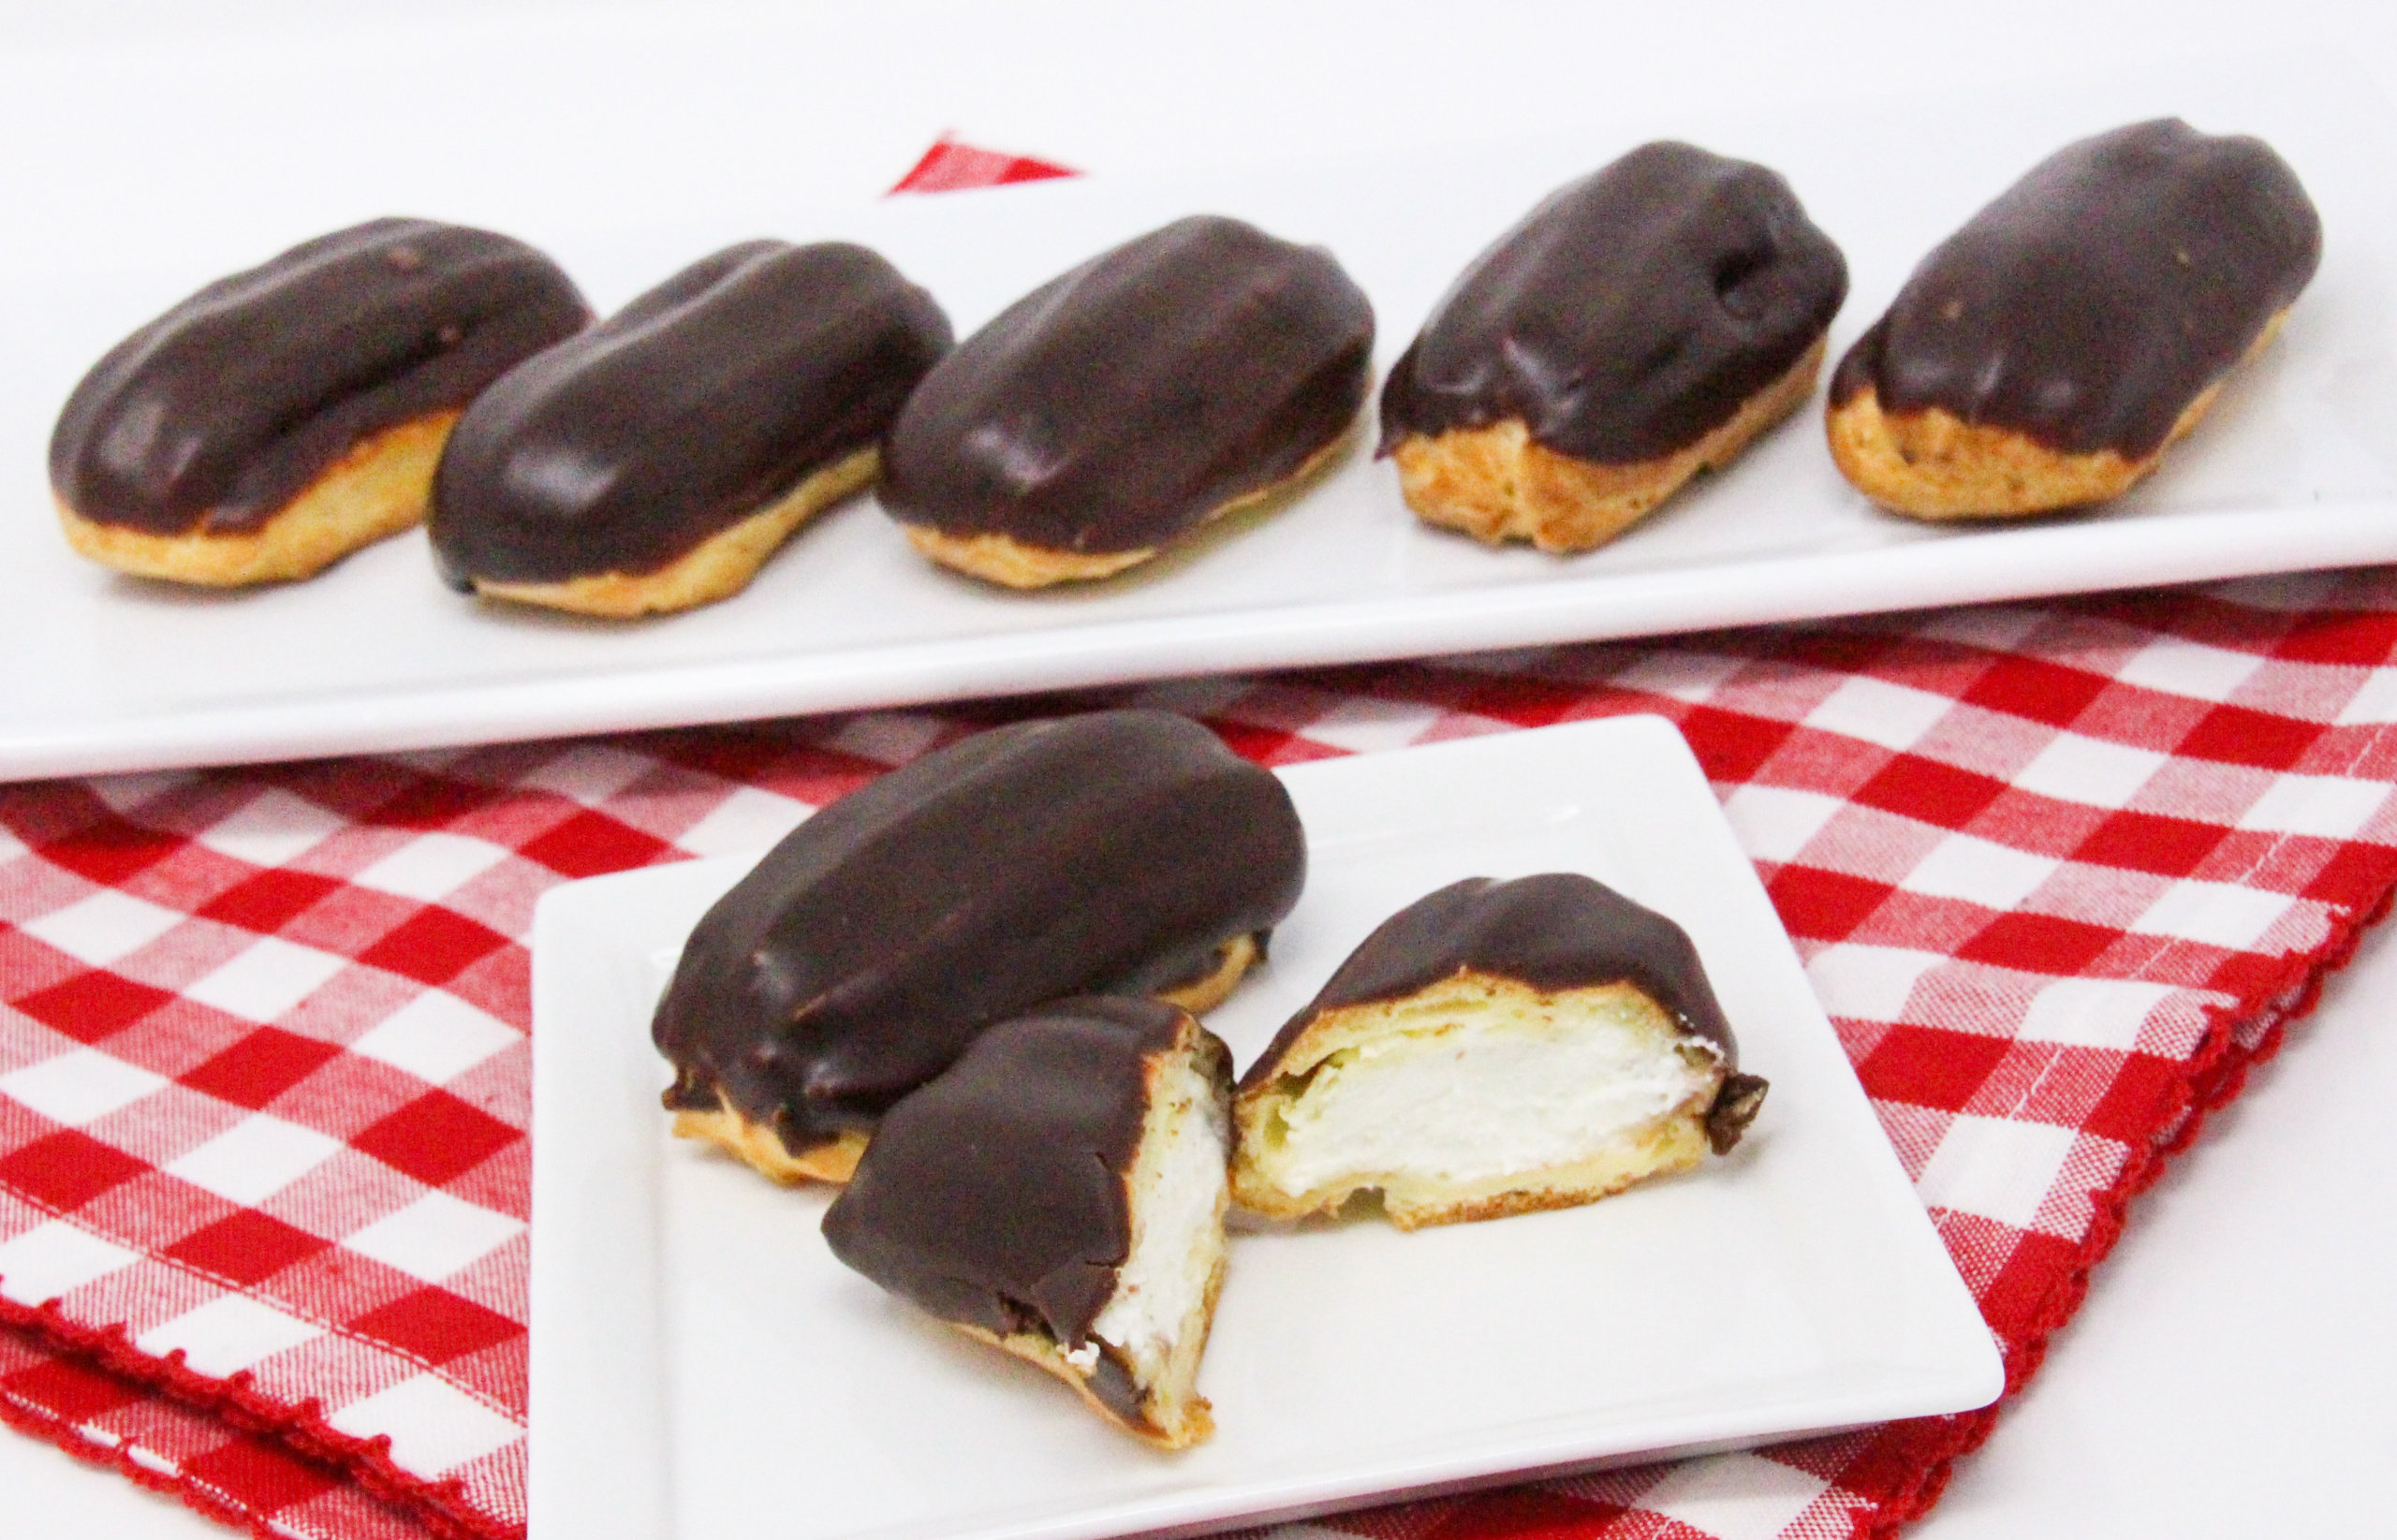 Easy-Peasy Chocolate Eclairs melt-in-your-mouth pastries are heavenly: soft and chocolaty, with sweet cream in the middle. You won’t be able to limit yourself to just one! Recipe shared with permission granted by Carlene O'Connor, author of MURDER ON AN IRISH FARM.